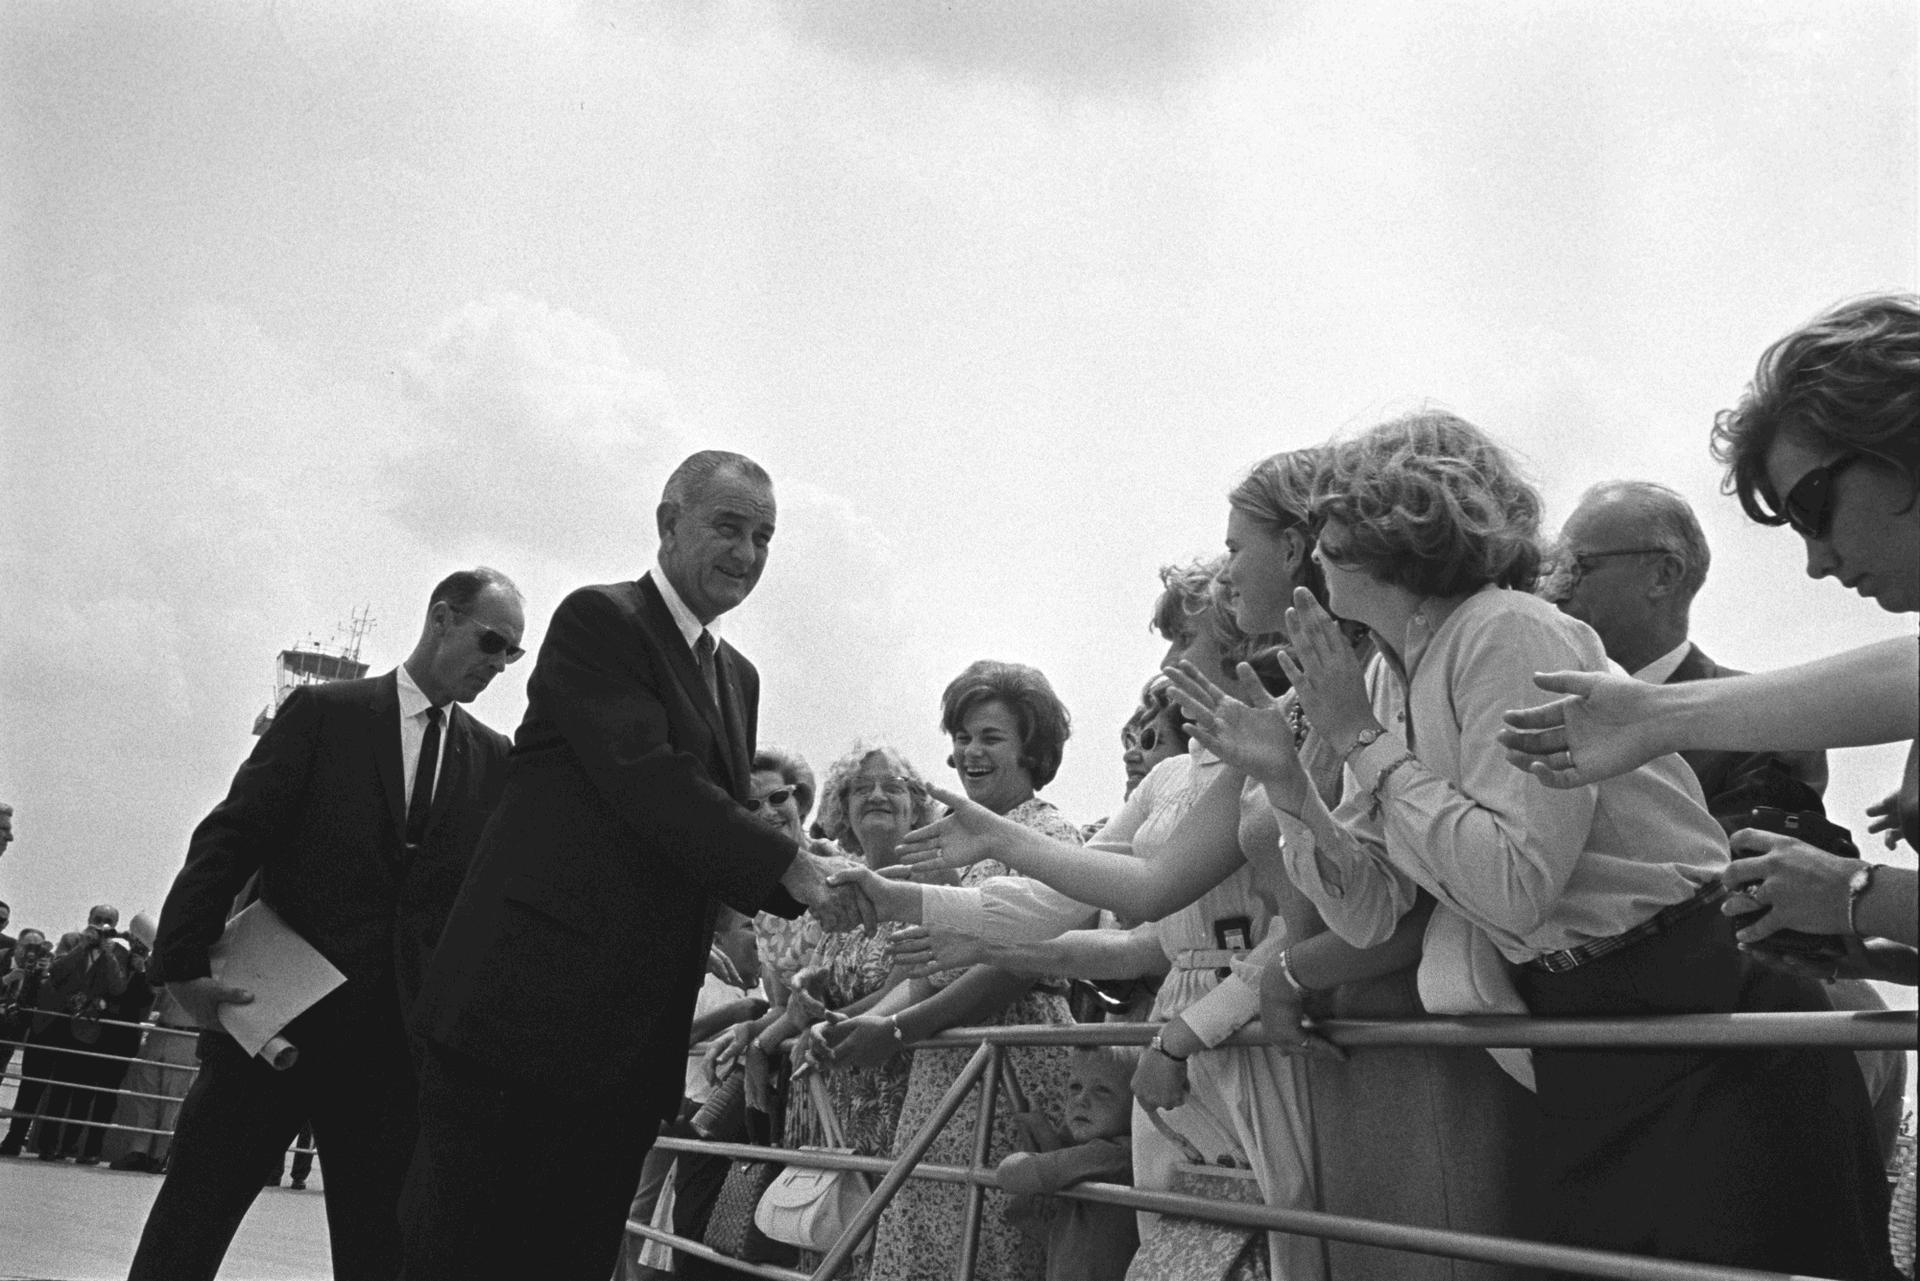 President Lyndon B. Johnson greets crowds, USSS Agent Rufus Youngblood is behind him.